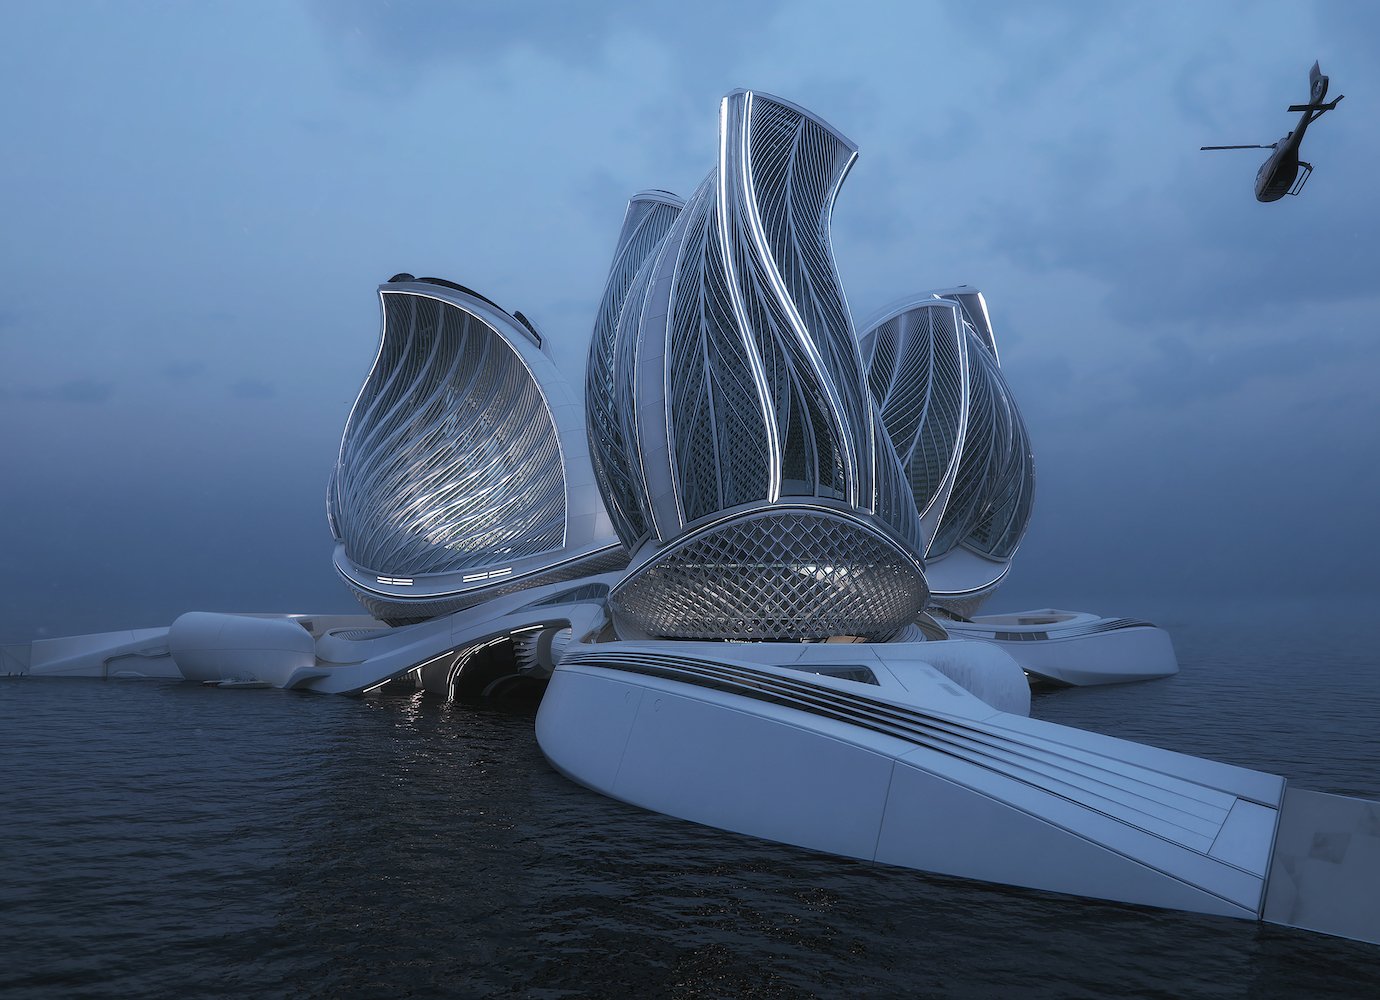 The 8th Continent: Slovak designer wins top prize for ocean station prototype that removes plastic from the sea